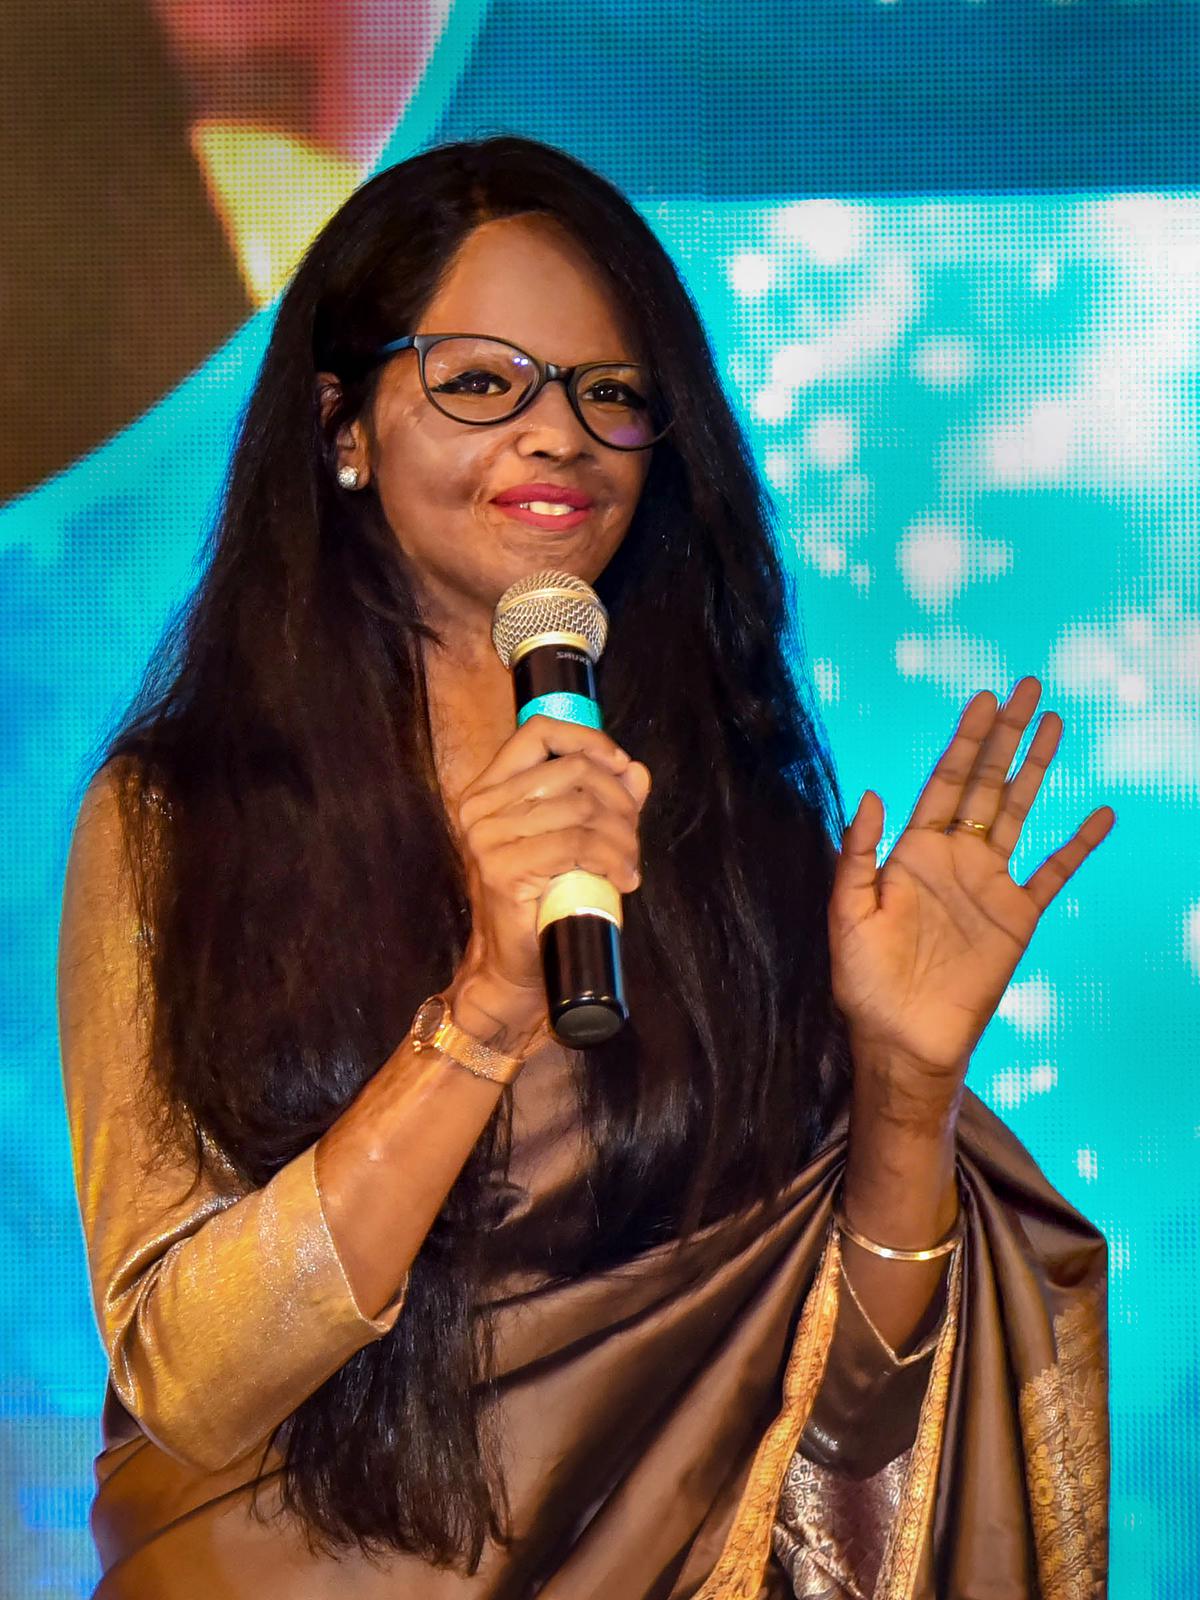 Television host, activist, and acid-attack survivor Laxmi Agarwal speaks during the The Indus Entrepreneurs (TiE) convention in Hubballi on Saturday